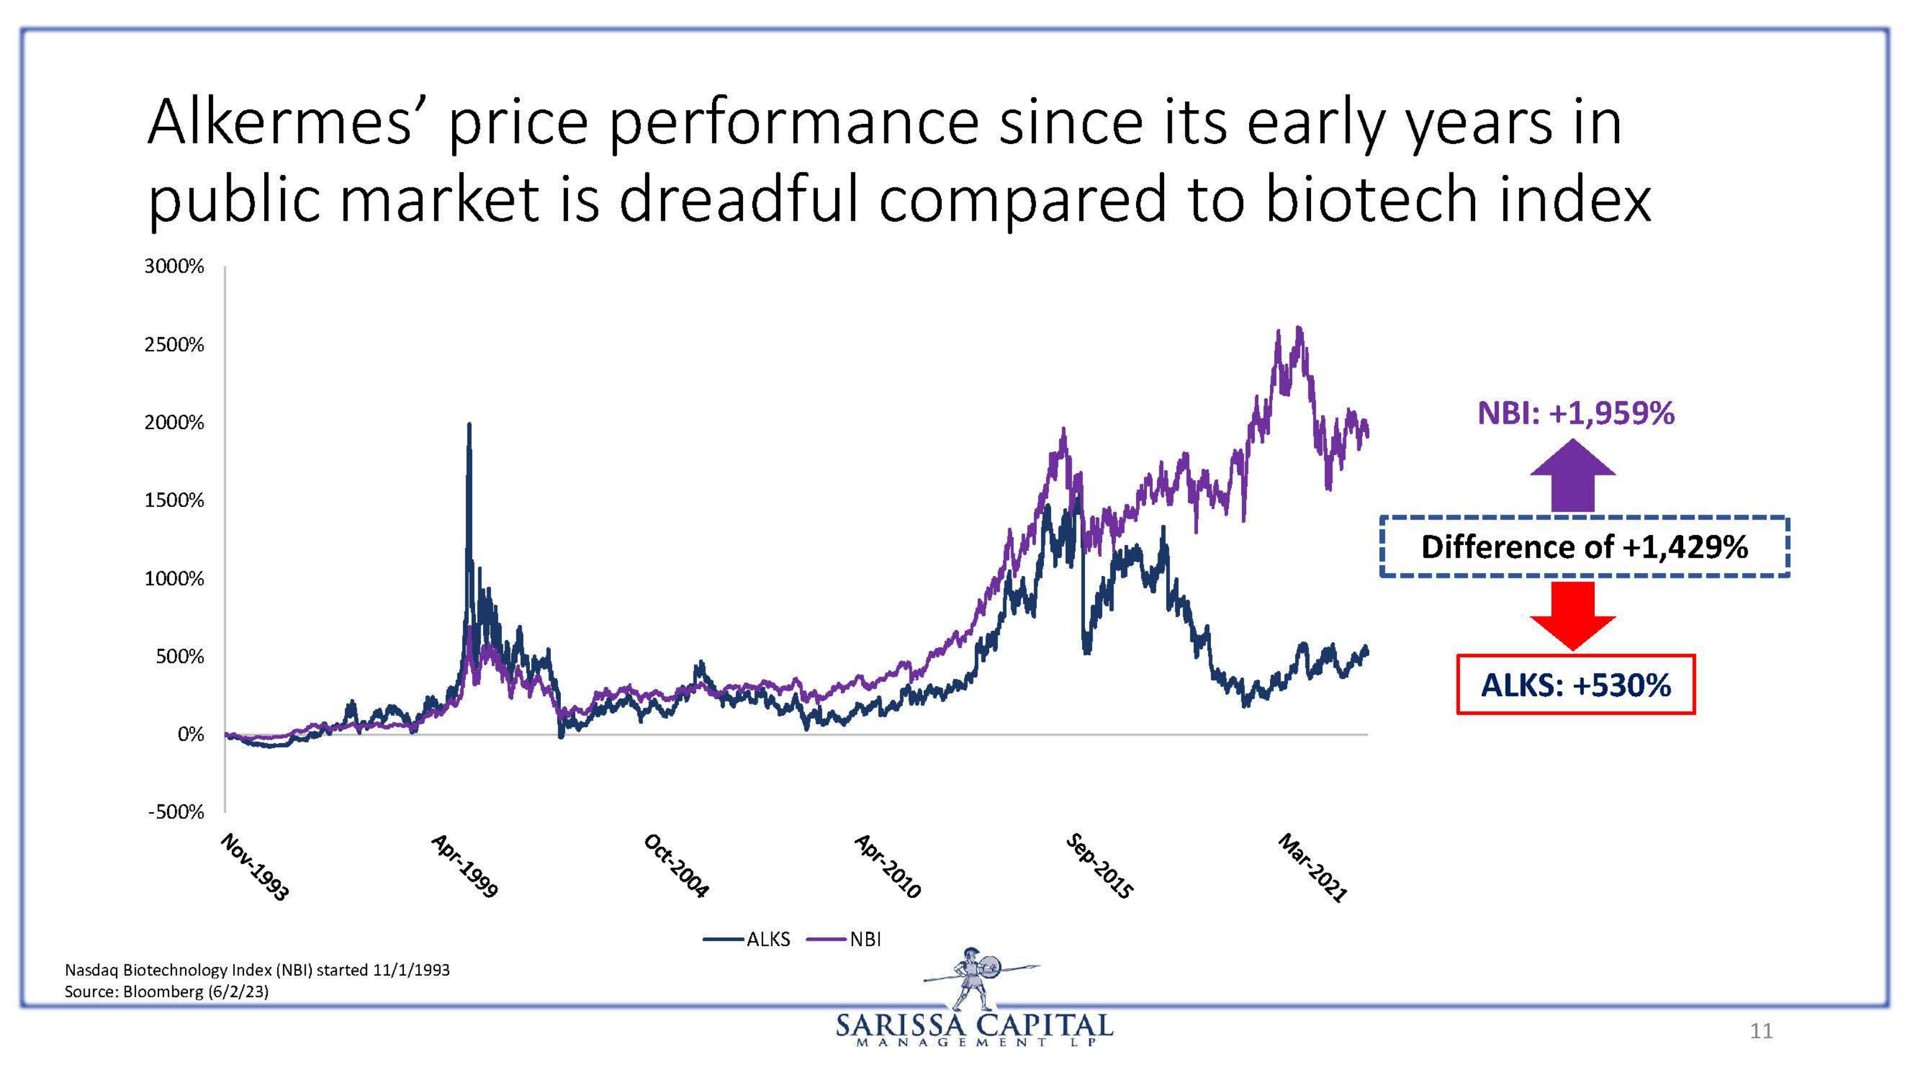 alkermes price performance since its early years in public market is dreadful compared to index | Sarissa Capital